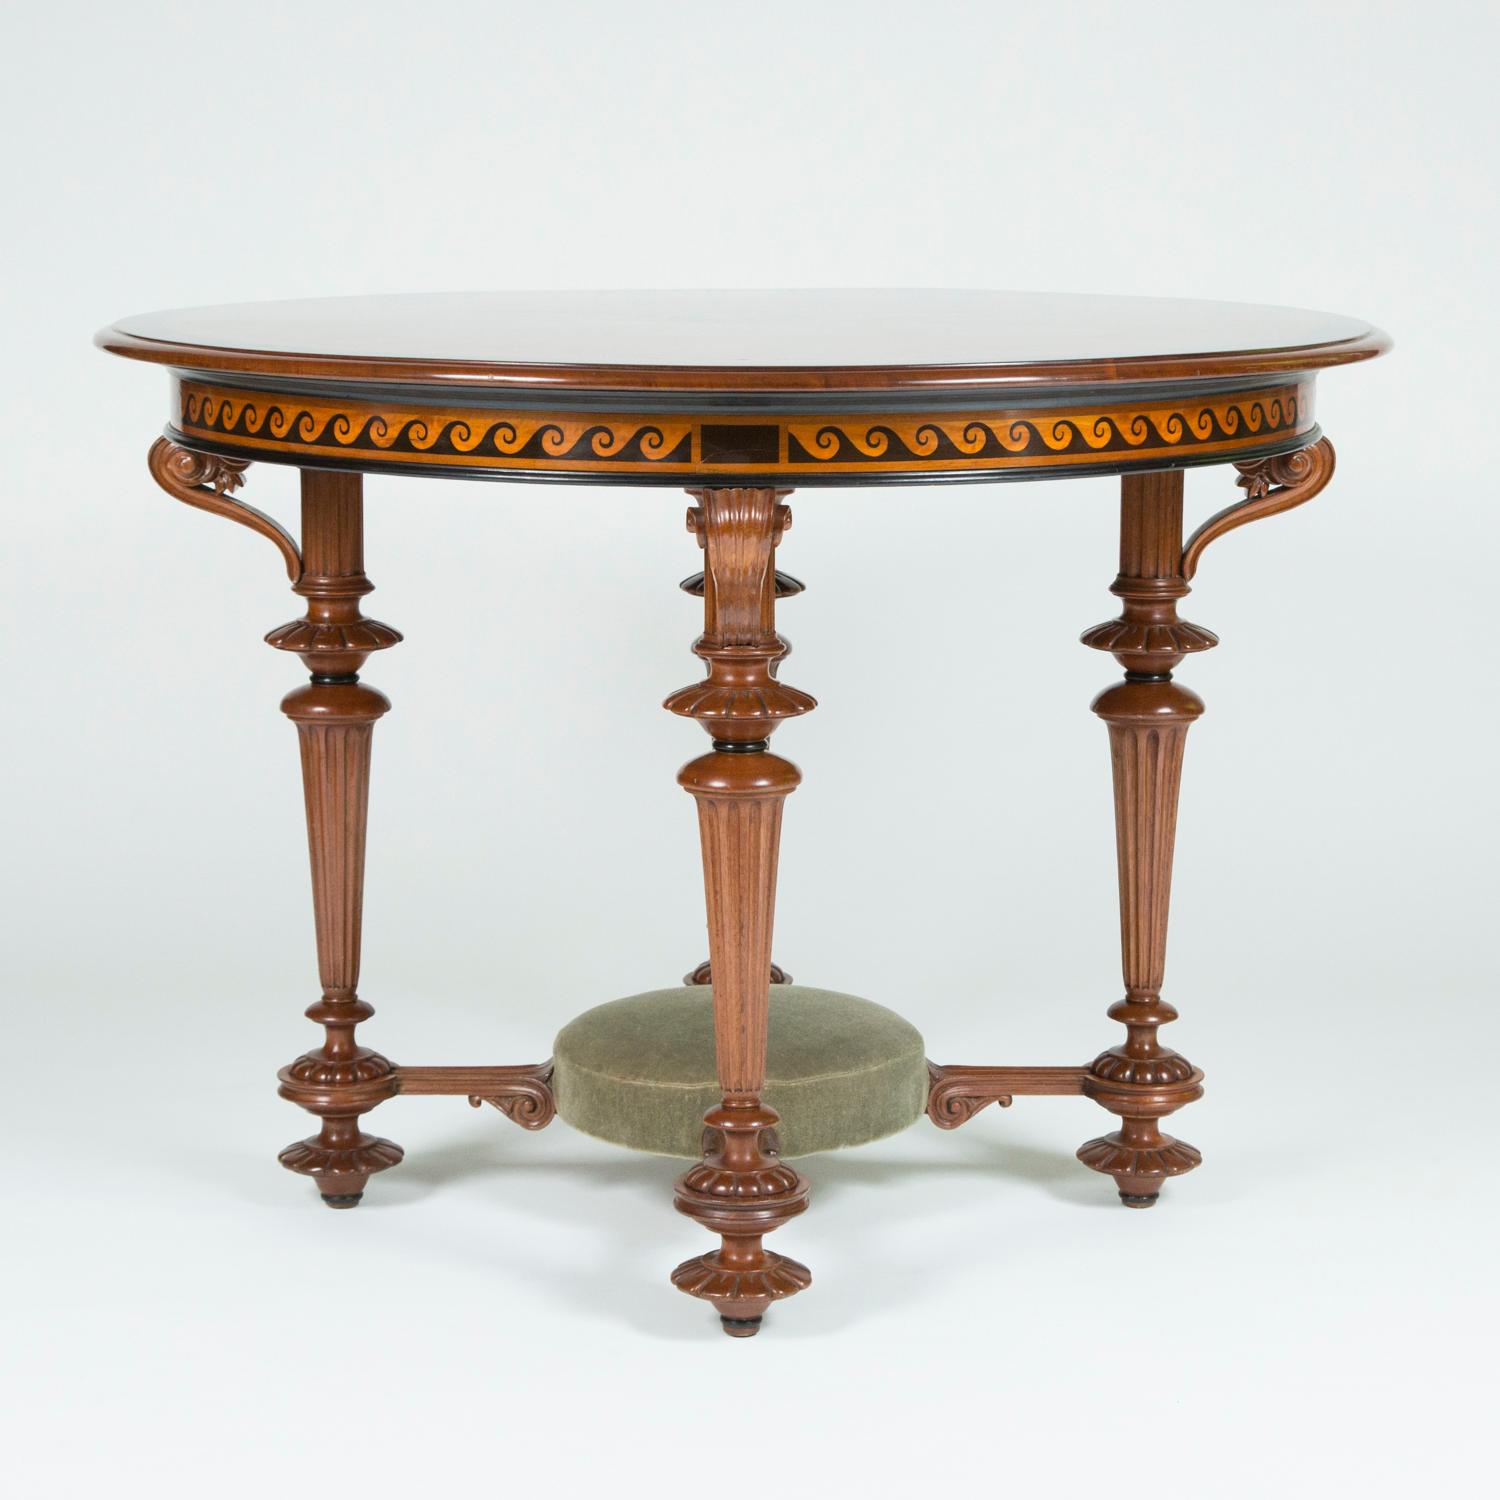 A fine quality circular carved walnut table inlaid with classical motifs. 

The top is veneered in burr walnut with a central marquetry 8 pointed star surrounded by palmettes radiating out to floral swags enclosed by a ebonized band. The turned